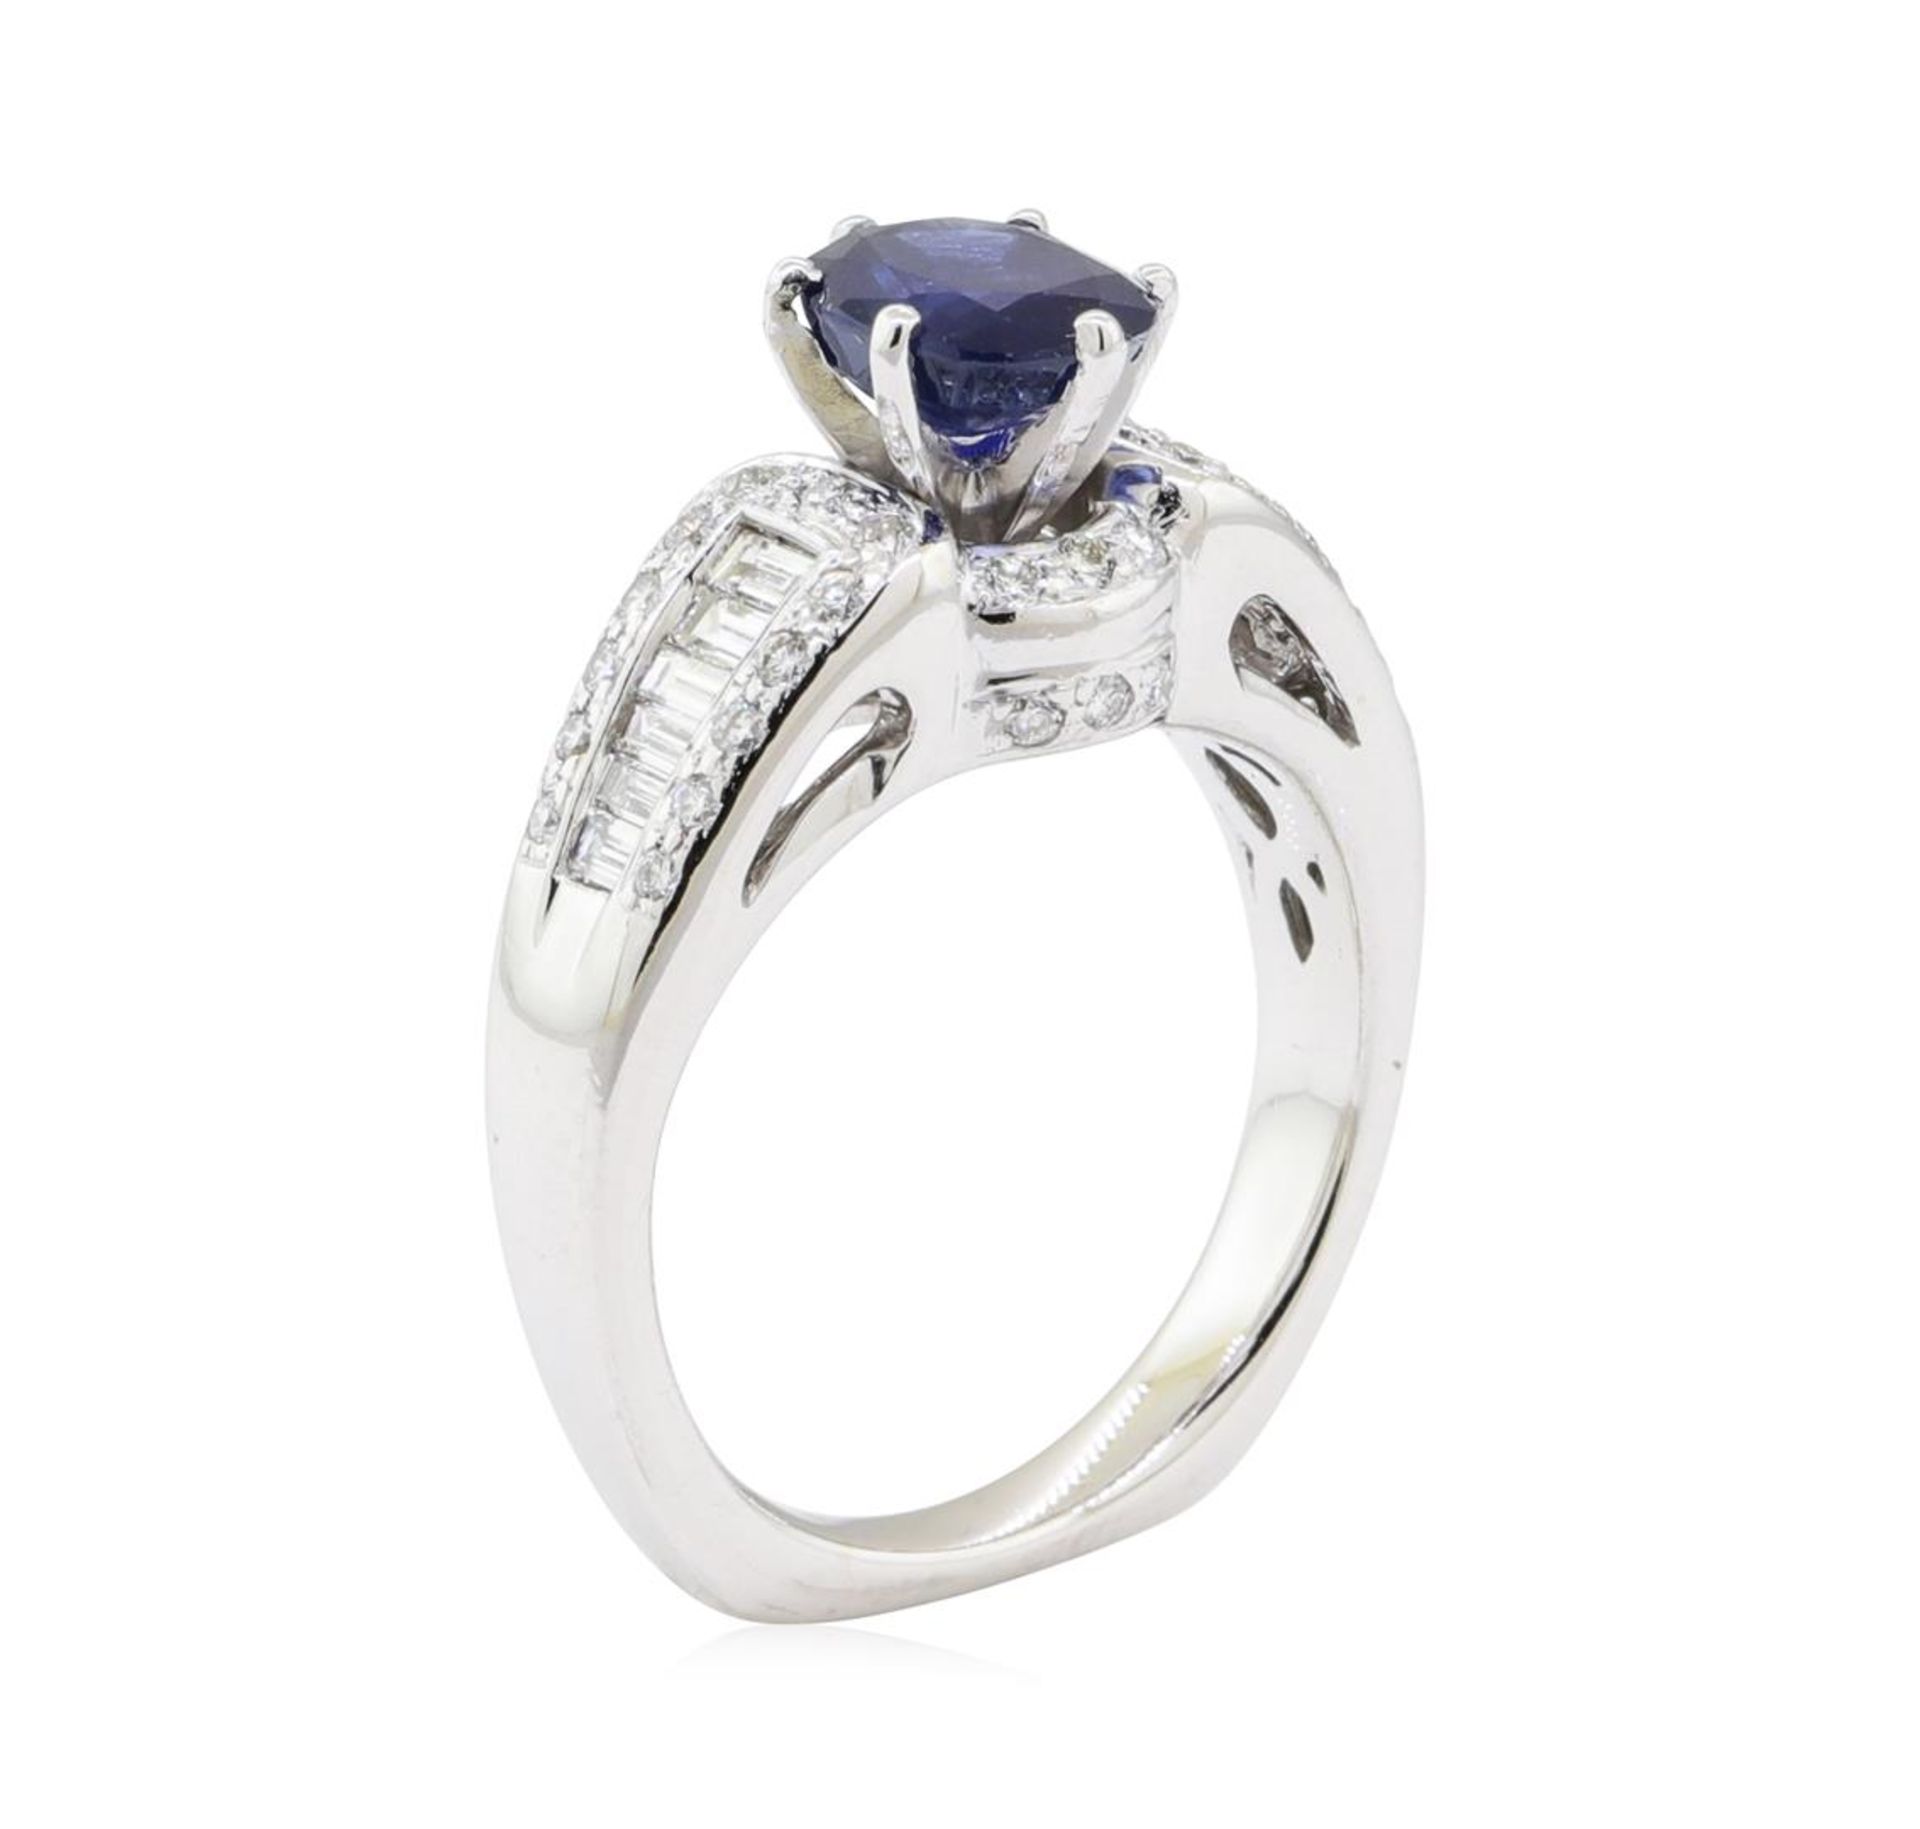 2.01 ctw Sapphire and Diamond Ring - 14KT White Gold - Image 7 of 10